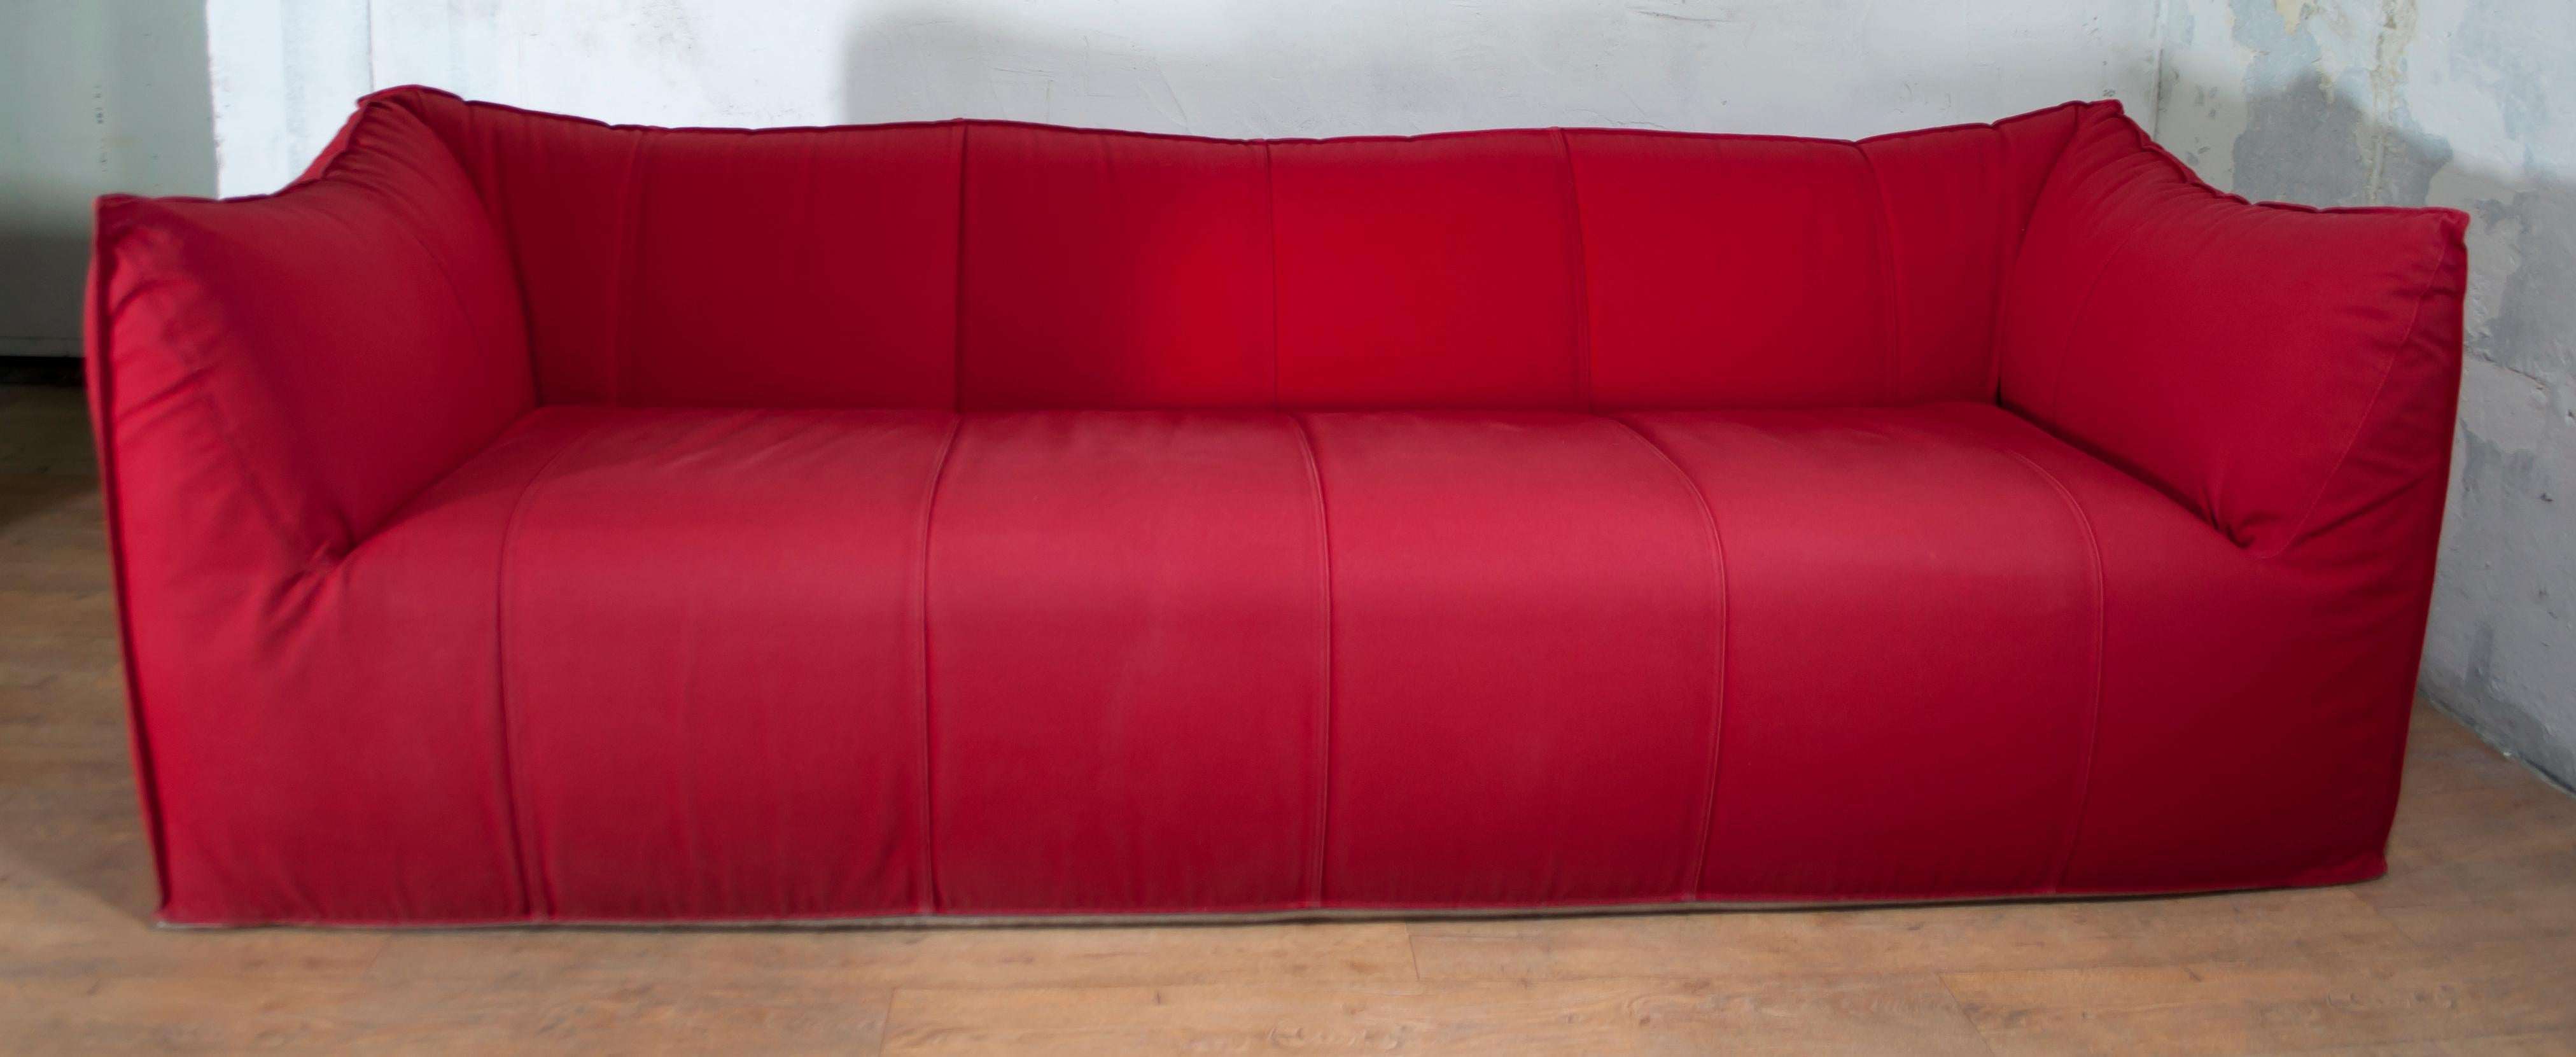 Mario Bellini designed Le Bambole for B&B Italia in 1972, armchairs and sofas shaped in their entirety as large cushions. Combining extraordinary comfort and style, this Tribambola sofa and the Pouf are upholstered in a vibrant red canvas, which is